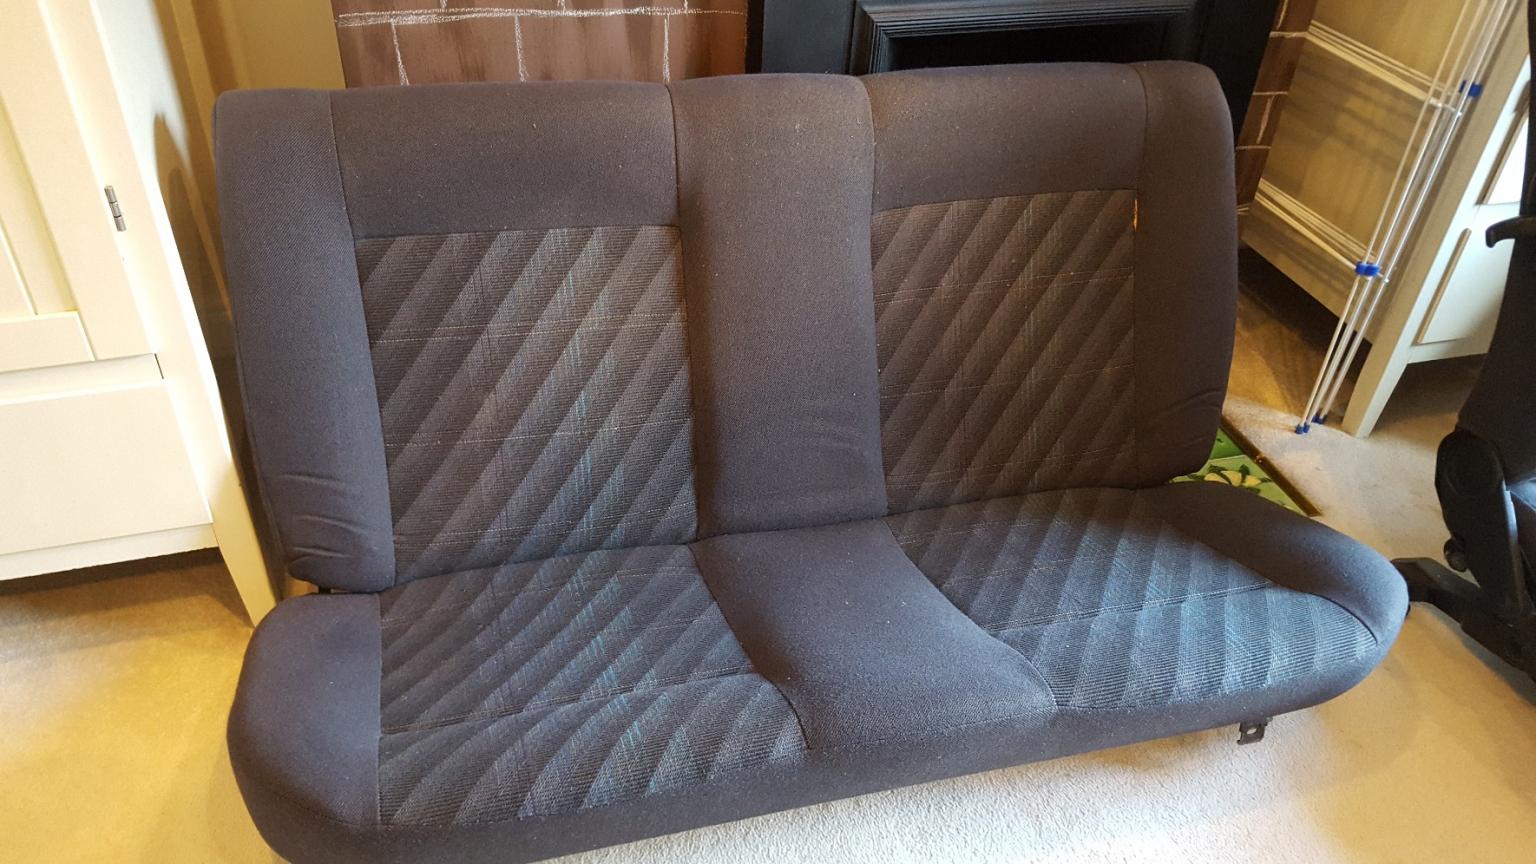 Mk2 Golf Gti Seats In S40 Chesterfield For 215 00 For Sale